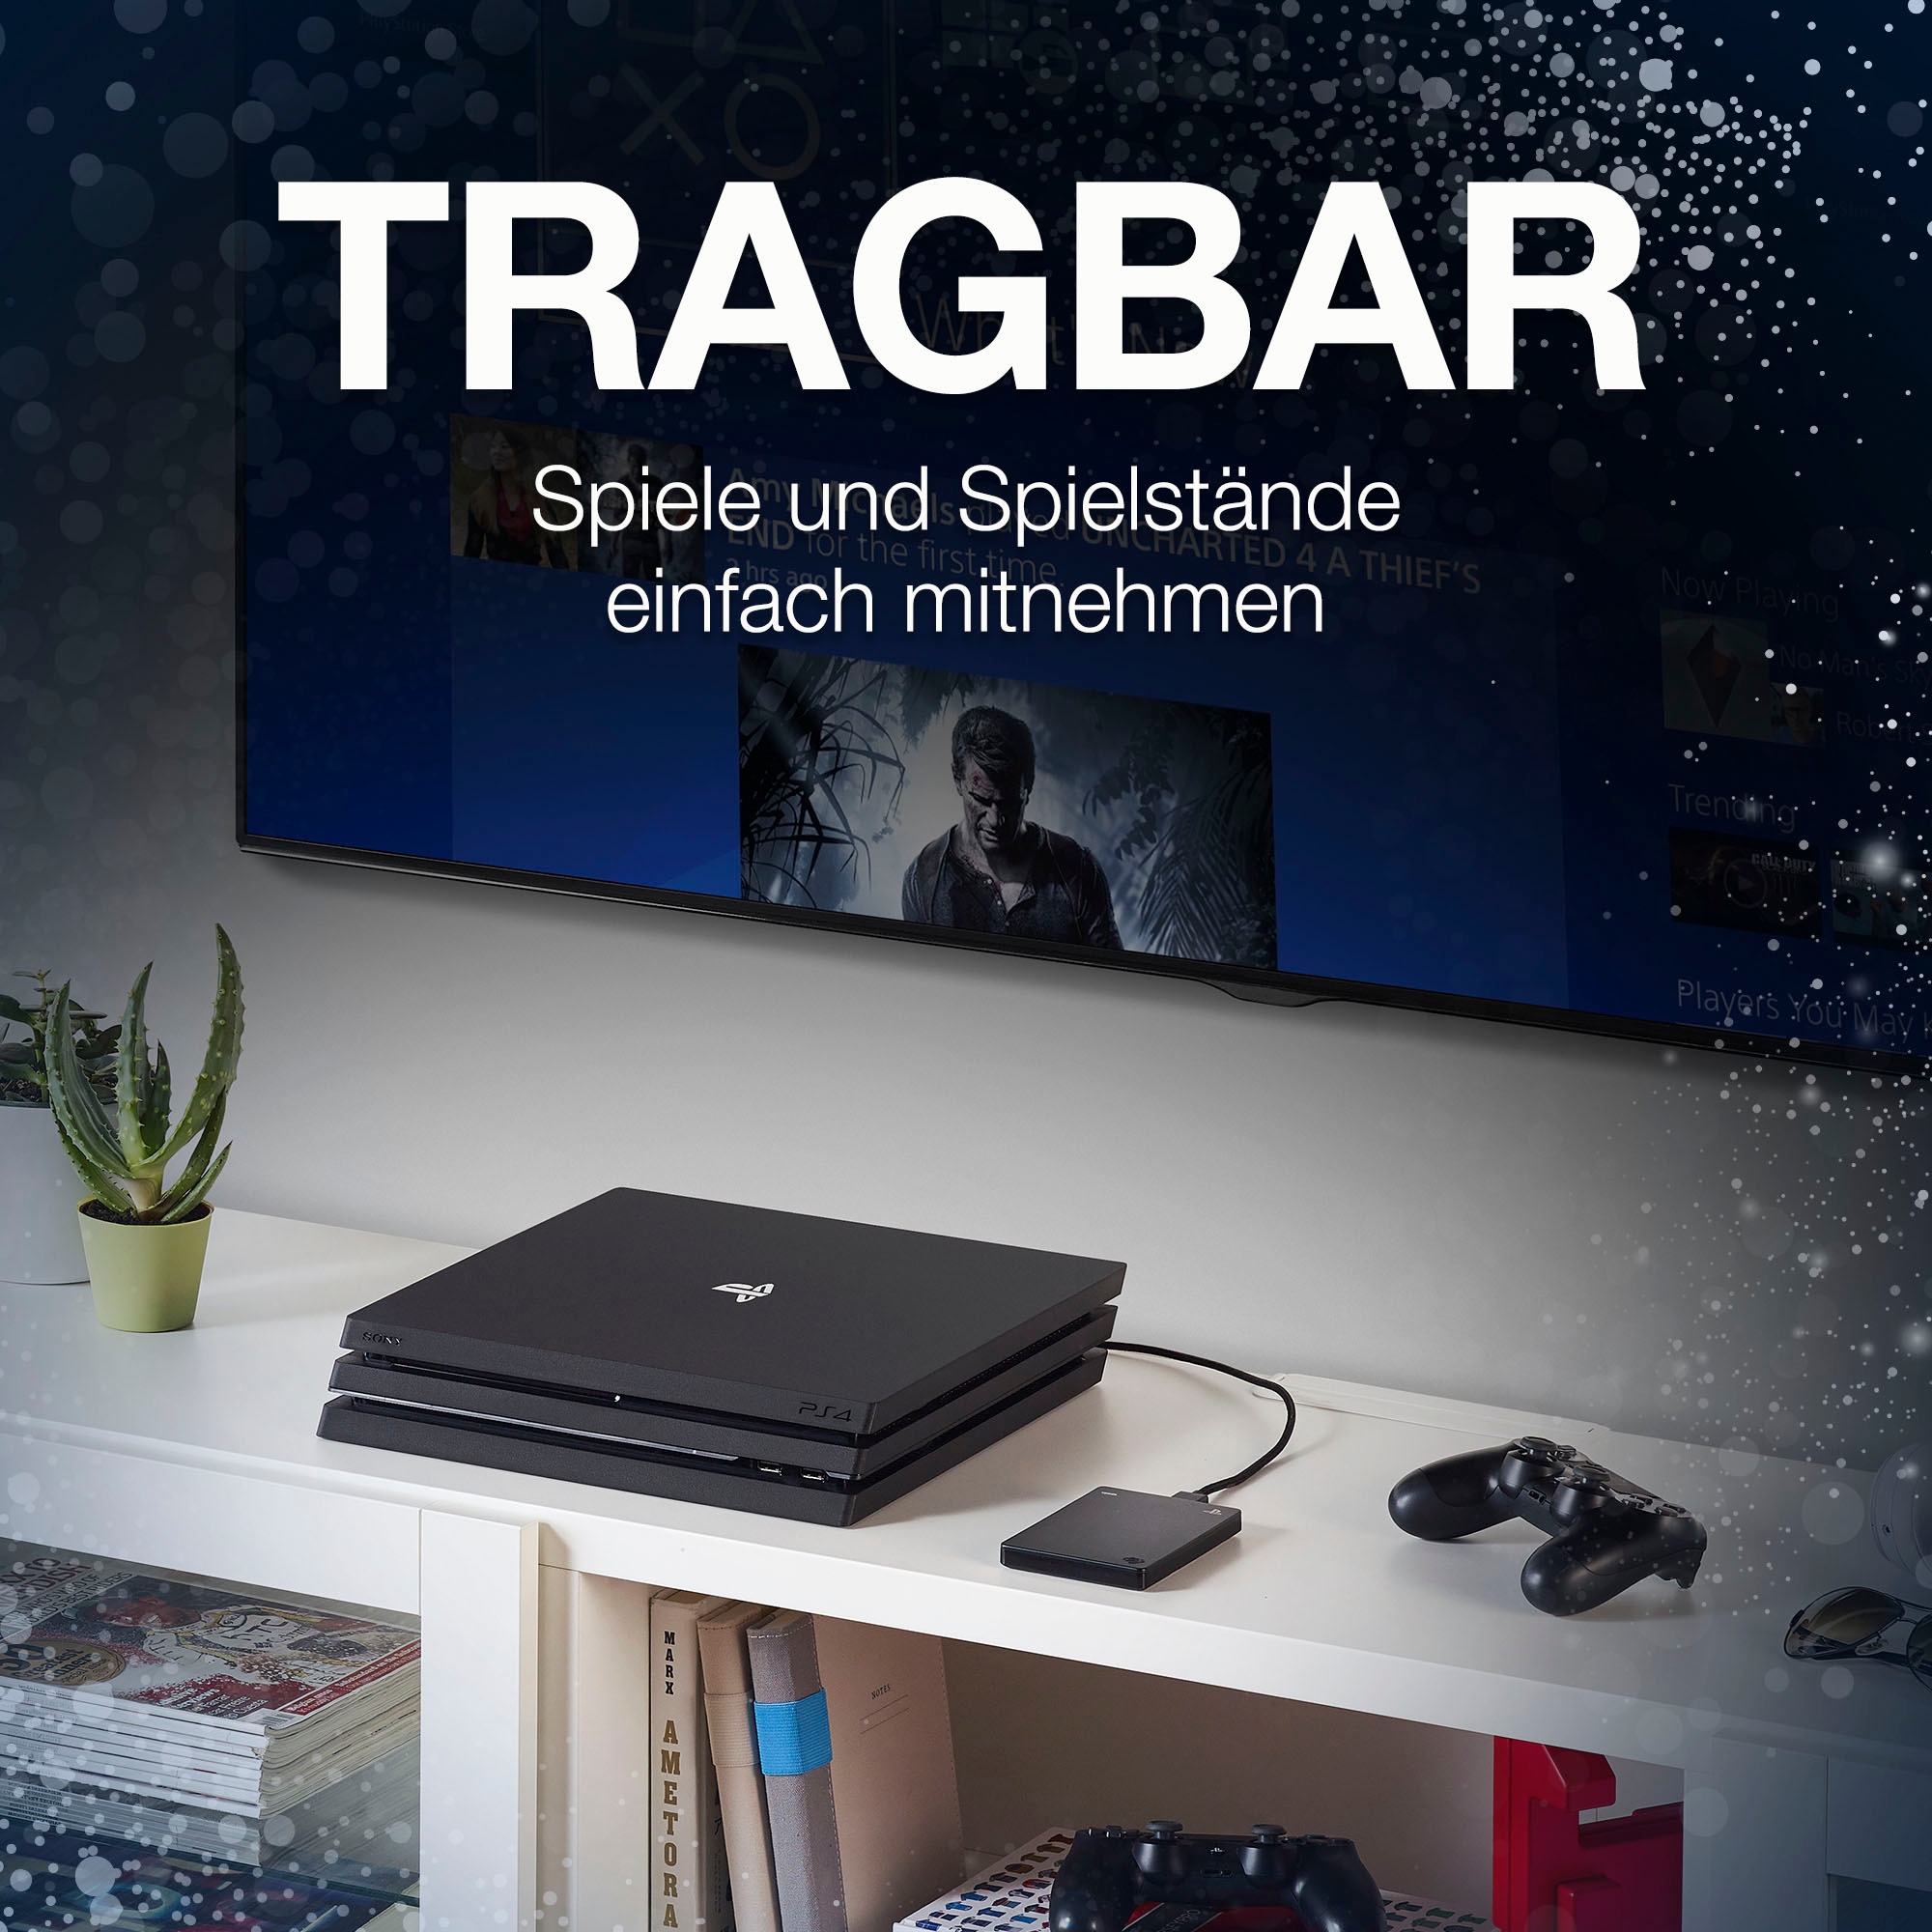 PS4 »Game Seagate 3.2 USB externe STGD2000200«, Drive | Anschluss 2,5 BAUR Gaming-Festplatte Zoll,